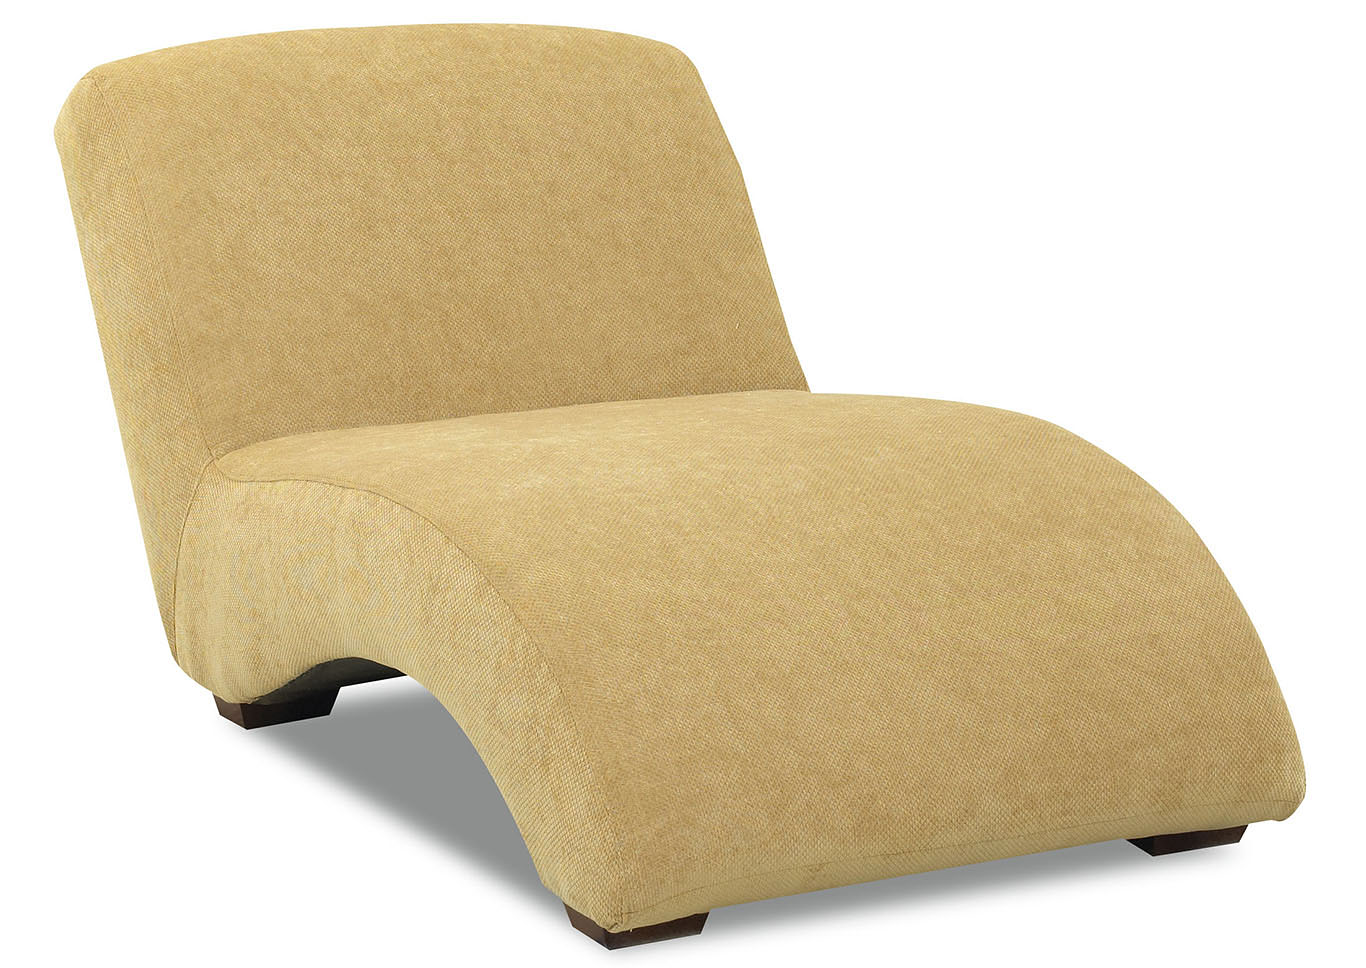 Celebration Colten Tan Stationary Fabric Chaise,Klaussner Home Furnishings